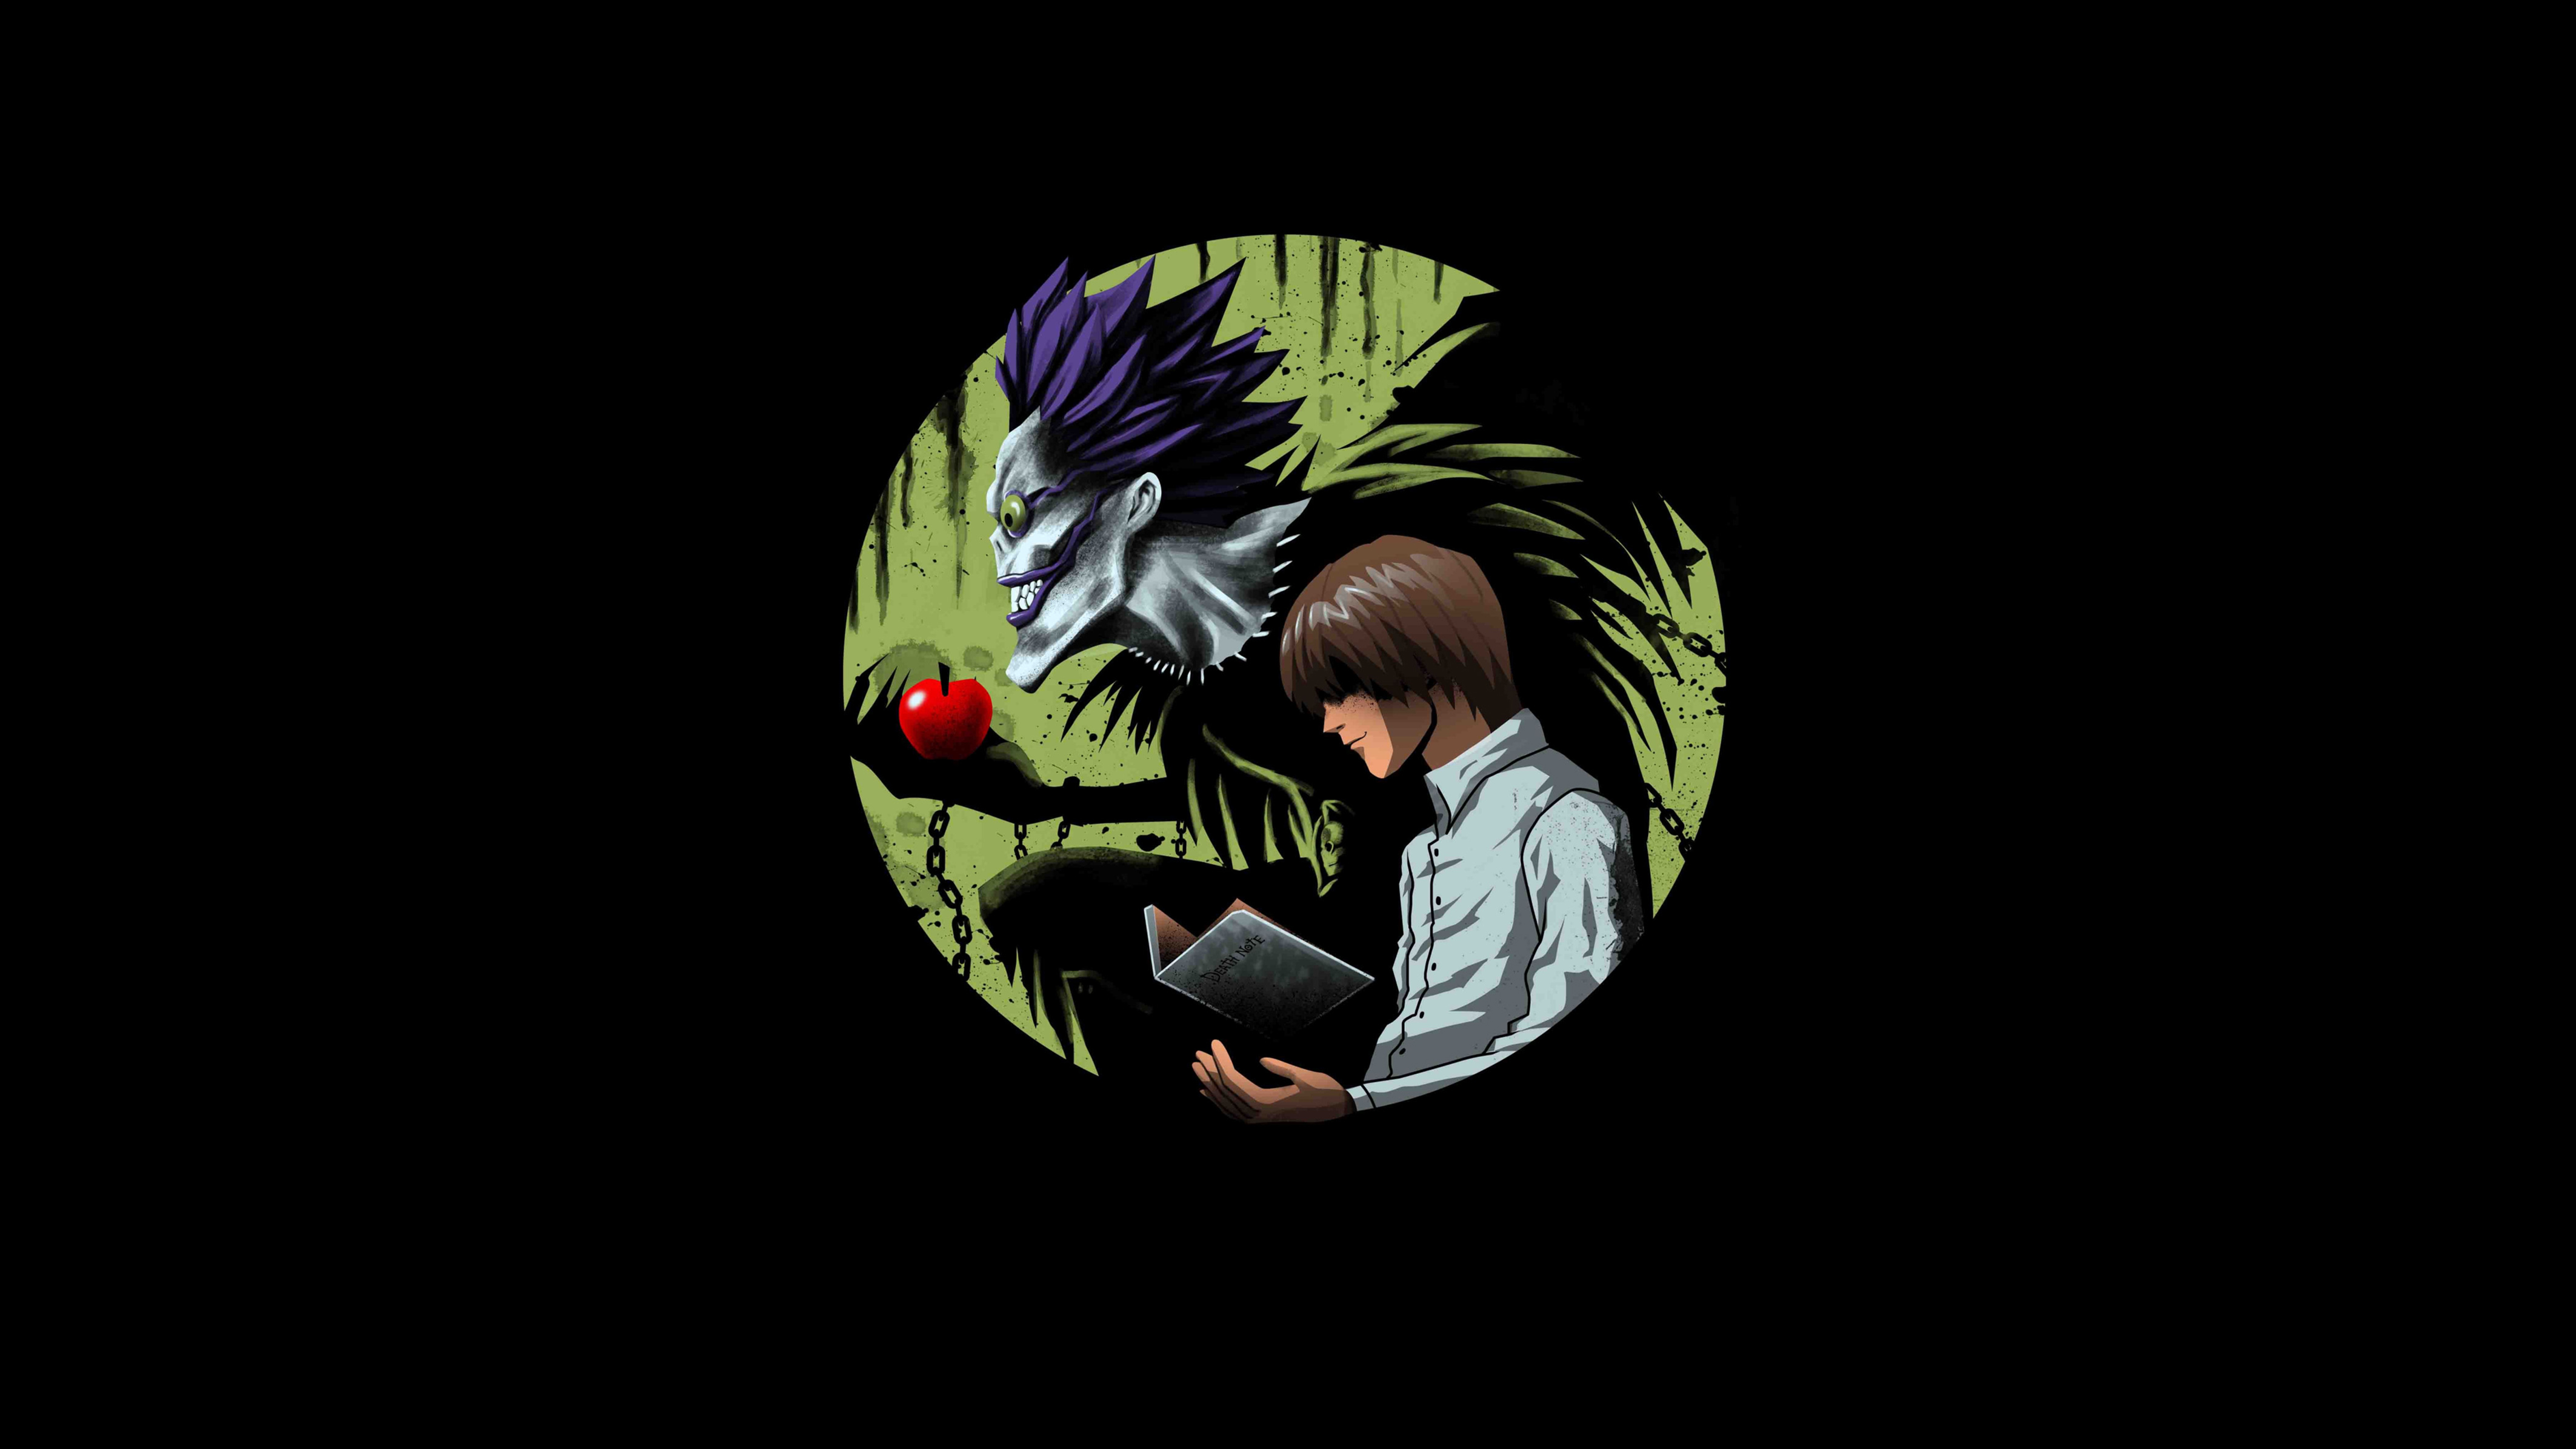 15 Death Note iPhone wallpapers in 2023 (Free HD download) - iGeeksBlog